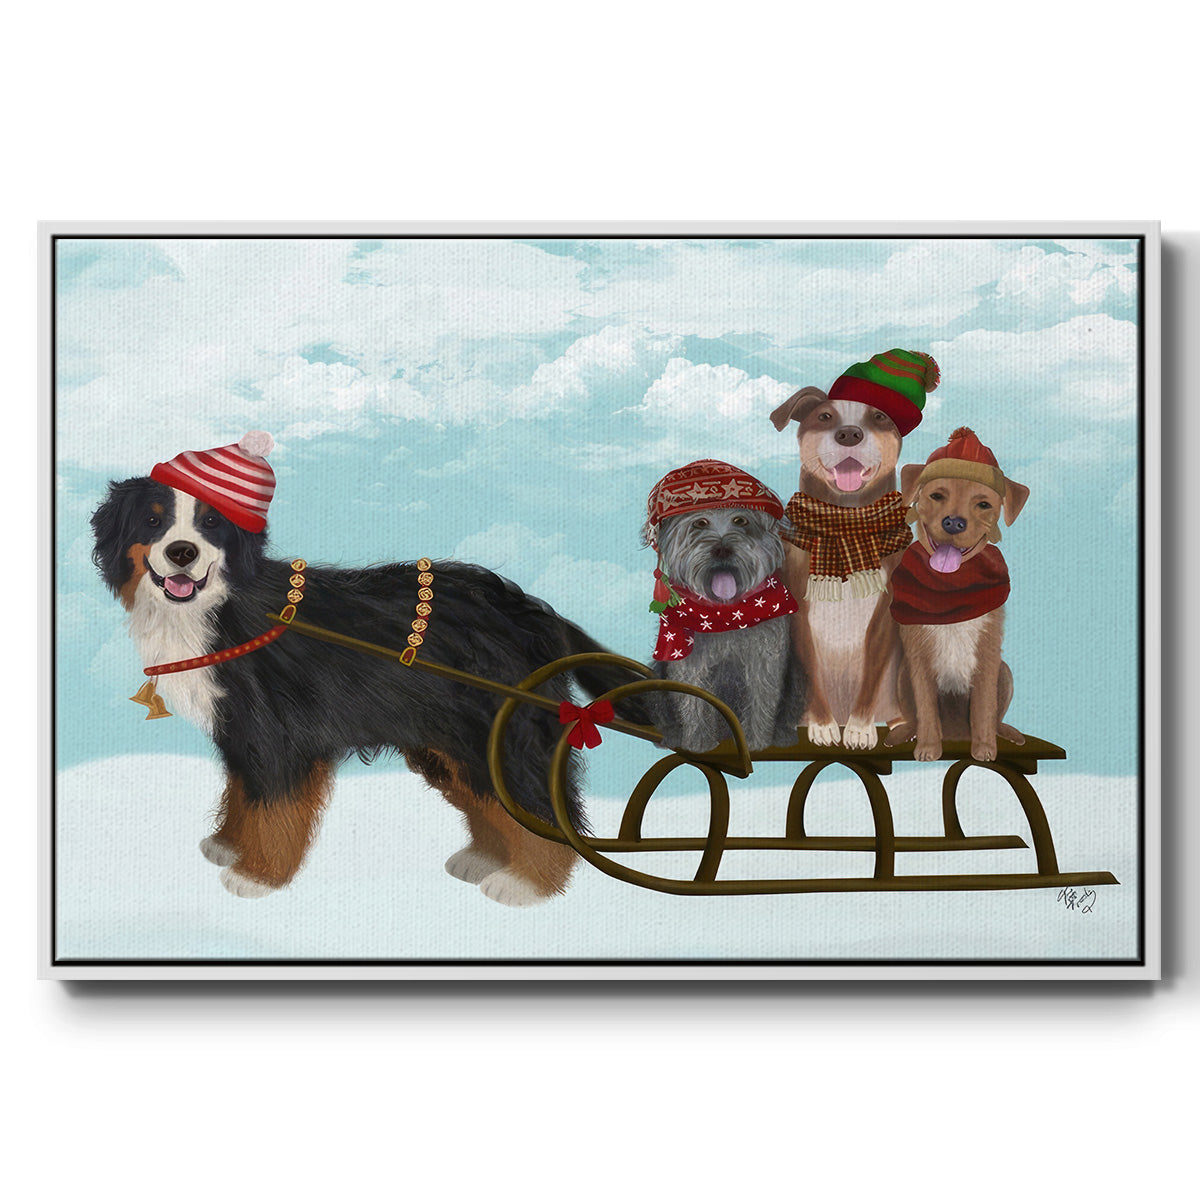 Christmas Mutt Sled - Framed Gallery Wrapped Canvas in Floating Frame